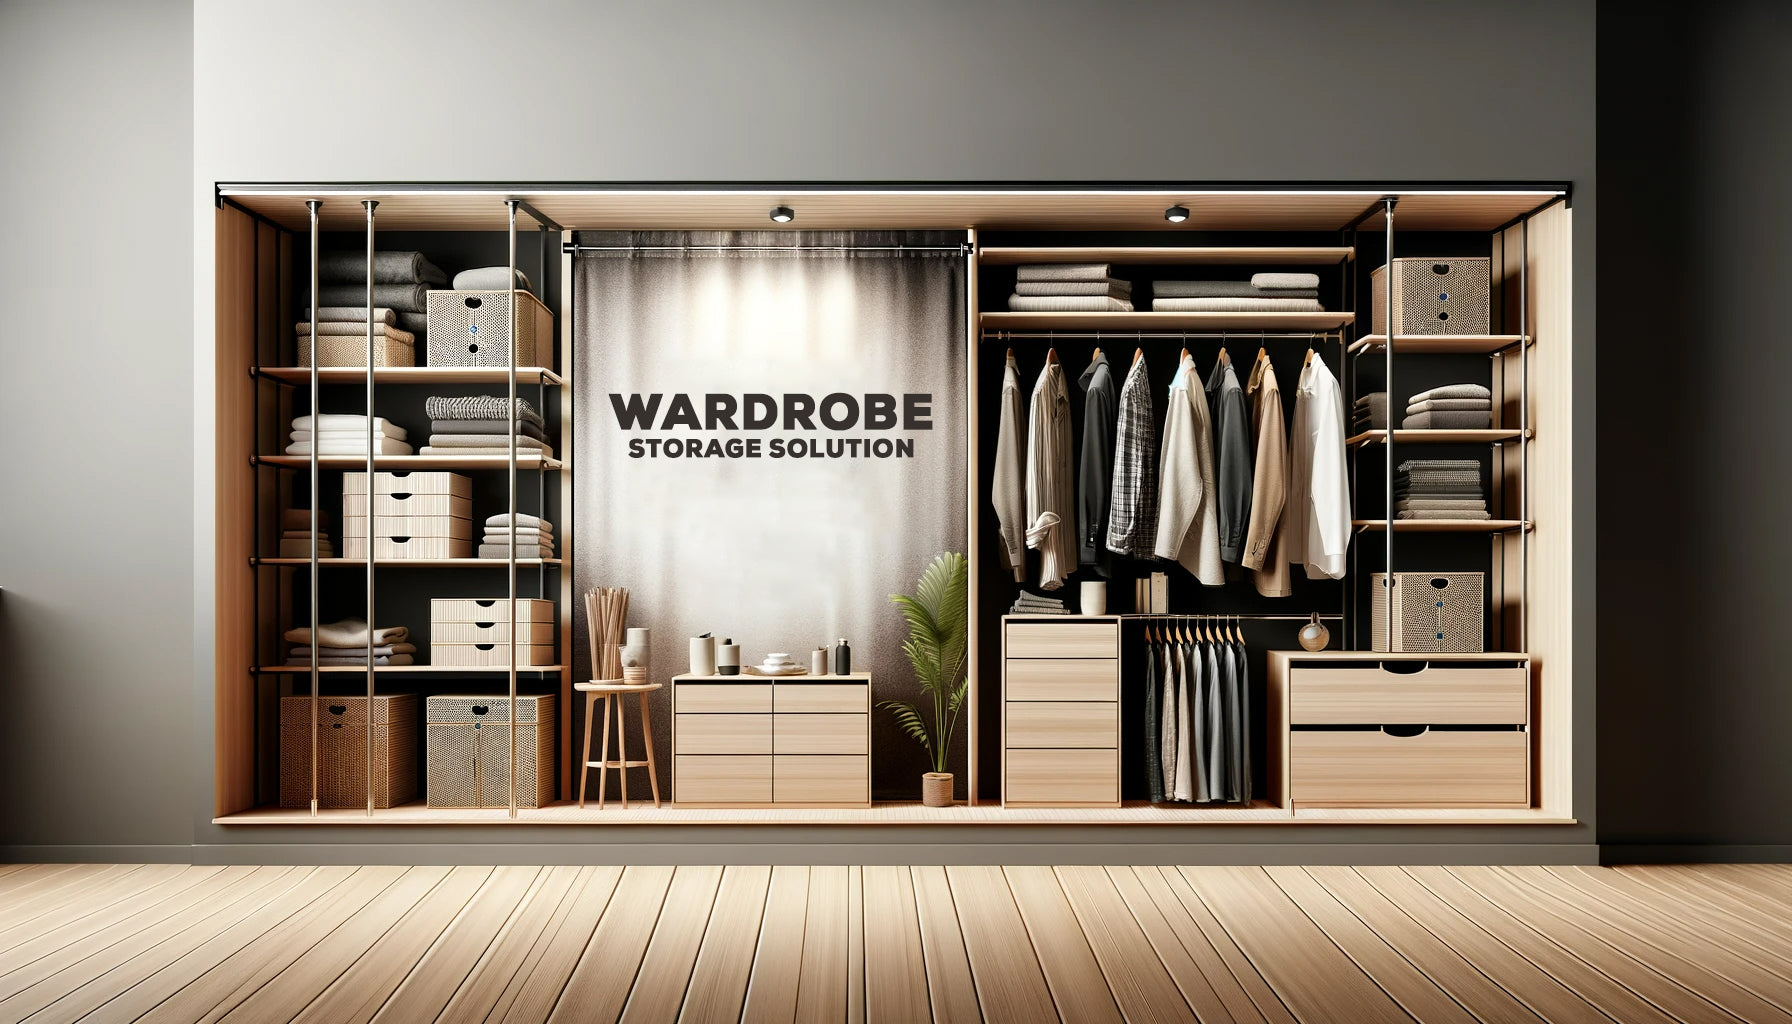 Discover versatile wardrobe storage solutions at Springs Street online shop Our collection features innovative clothing organizers, sleek pants storage boxes, and durable hangers,